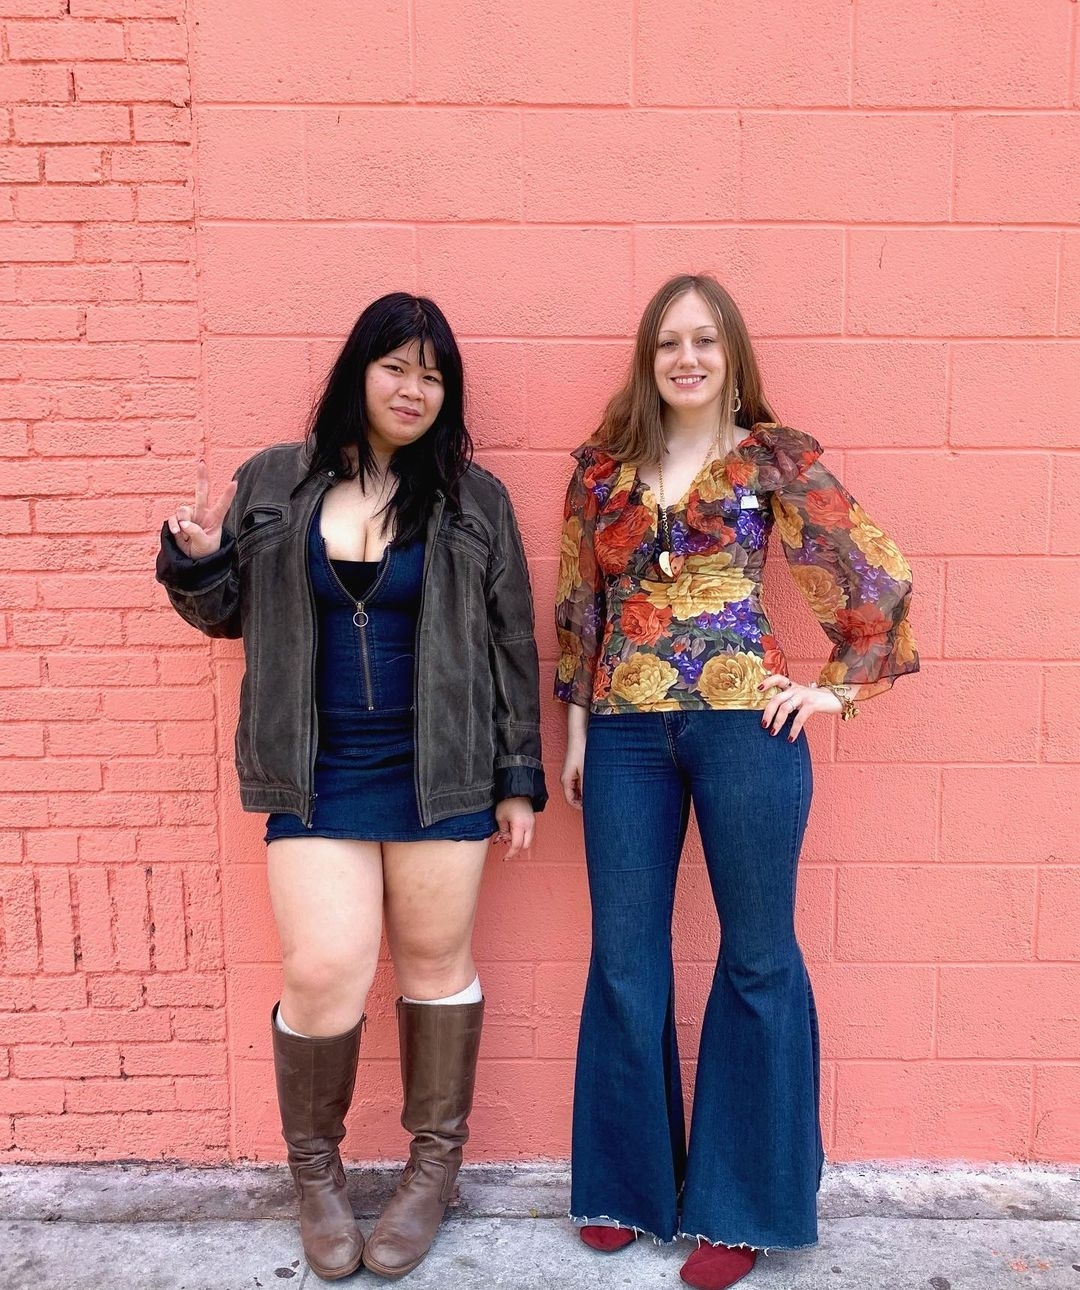 We 🧡 to see our team grow! These two employees from our Sunset Blvd location just hit 3 years at Crossroads. Time to celebrate! 🥳🎉

BTW... @crossroads_socal is BACK! Give them a follow to stay up-to-date on all things going on in our Southern California locations. ☀

📸: Crossroads Los Feliz @crossroads_socal 

#crossroadstrading #crossroadsfinds #crossroadsstore #fashionfinds #buyselltrade #style #thriftfinds #consignment #shopping #womensfashion #mensfashion #fashionblogger #ootd #fashion #thrift #sustainablefashion #secondhandfirst #shopthrift #consignment #thrifted